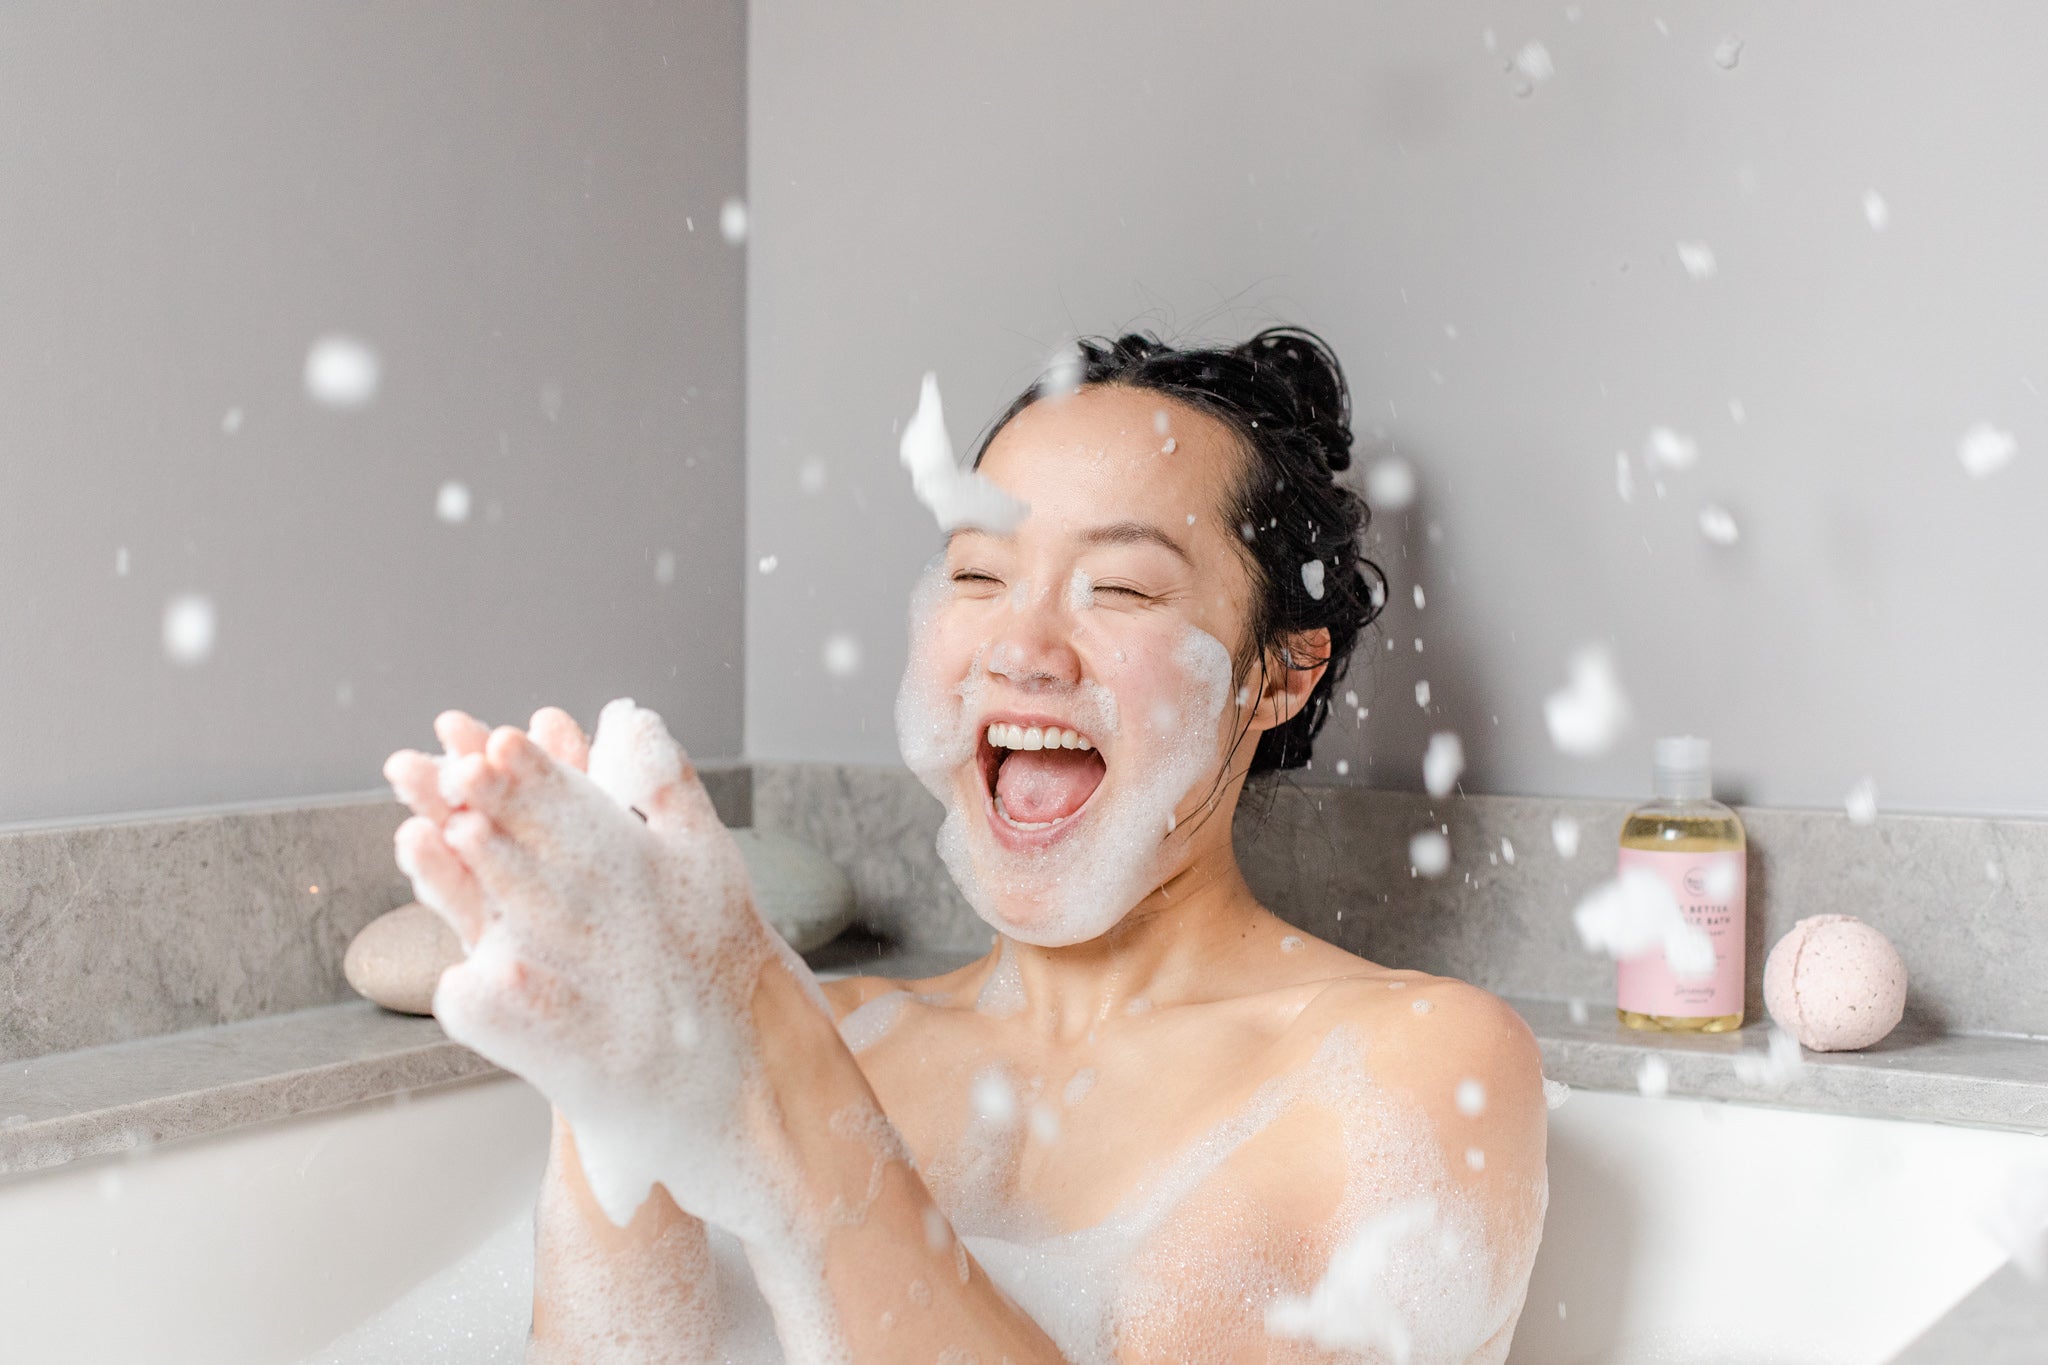 Woman laughing in the bath tub clapping her hands together throwing bubbles in the air with all-natural, local, Canadian SLS-free bubble bath from Rocky Mountain Soap Company.